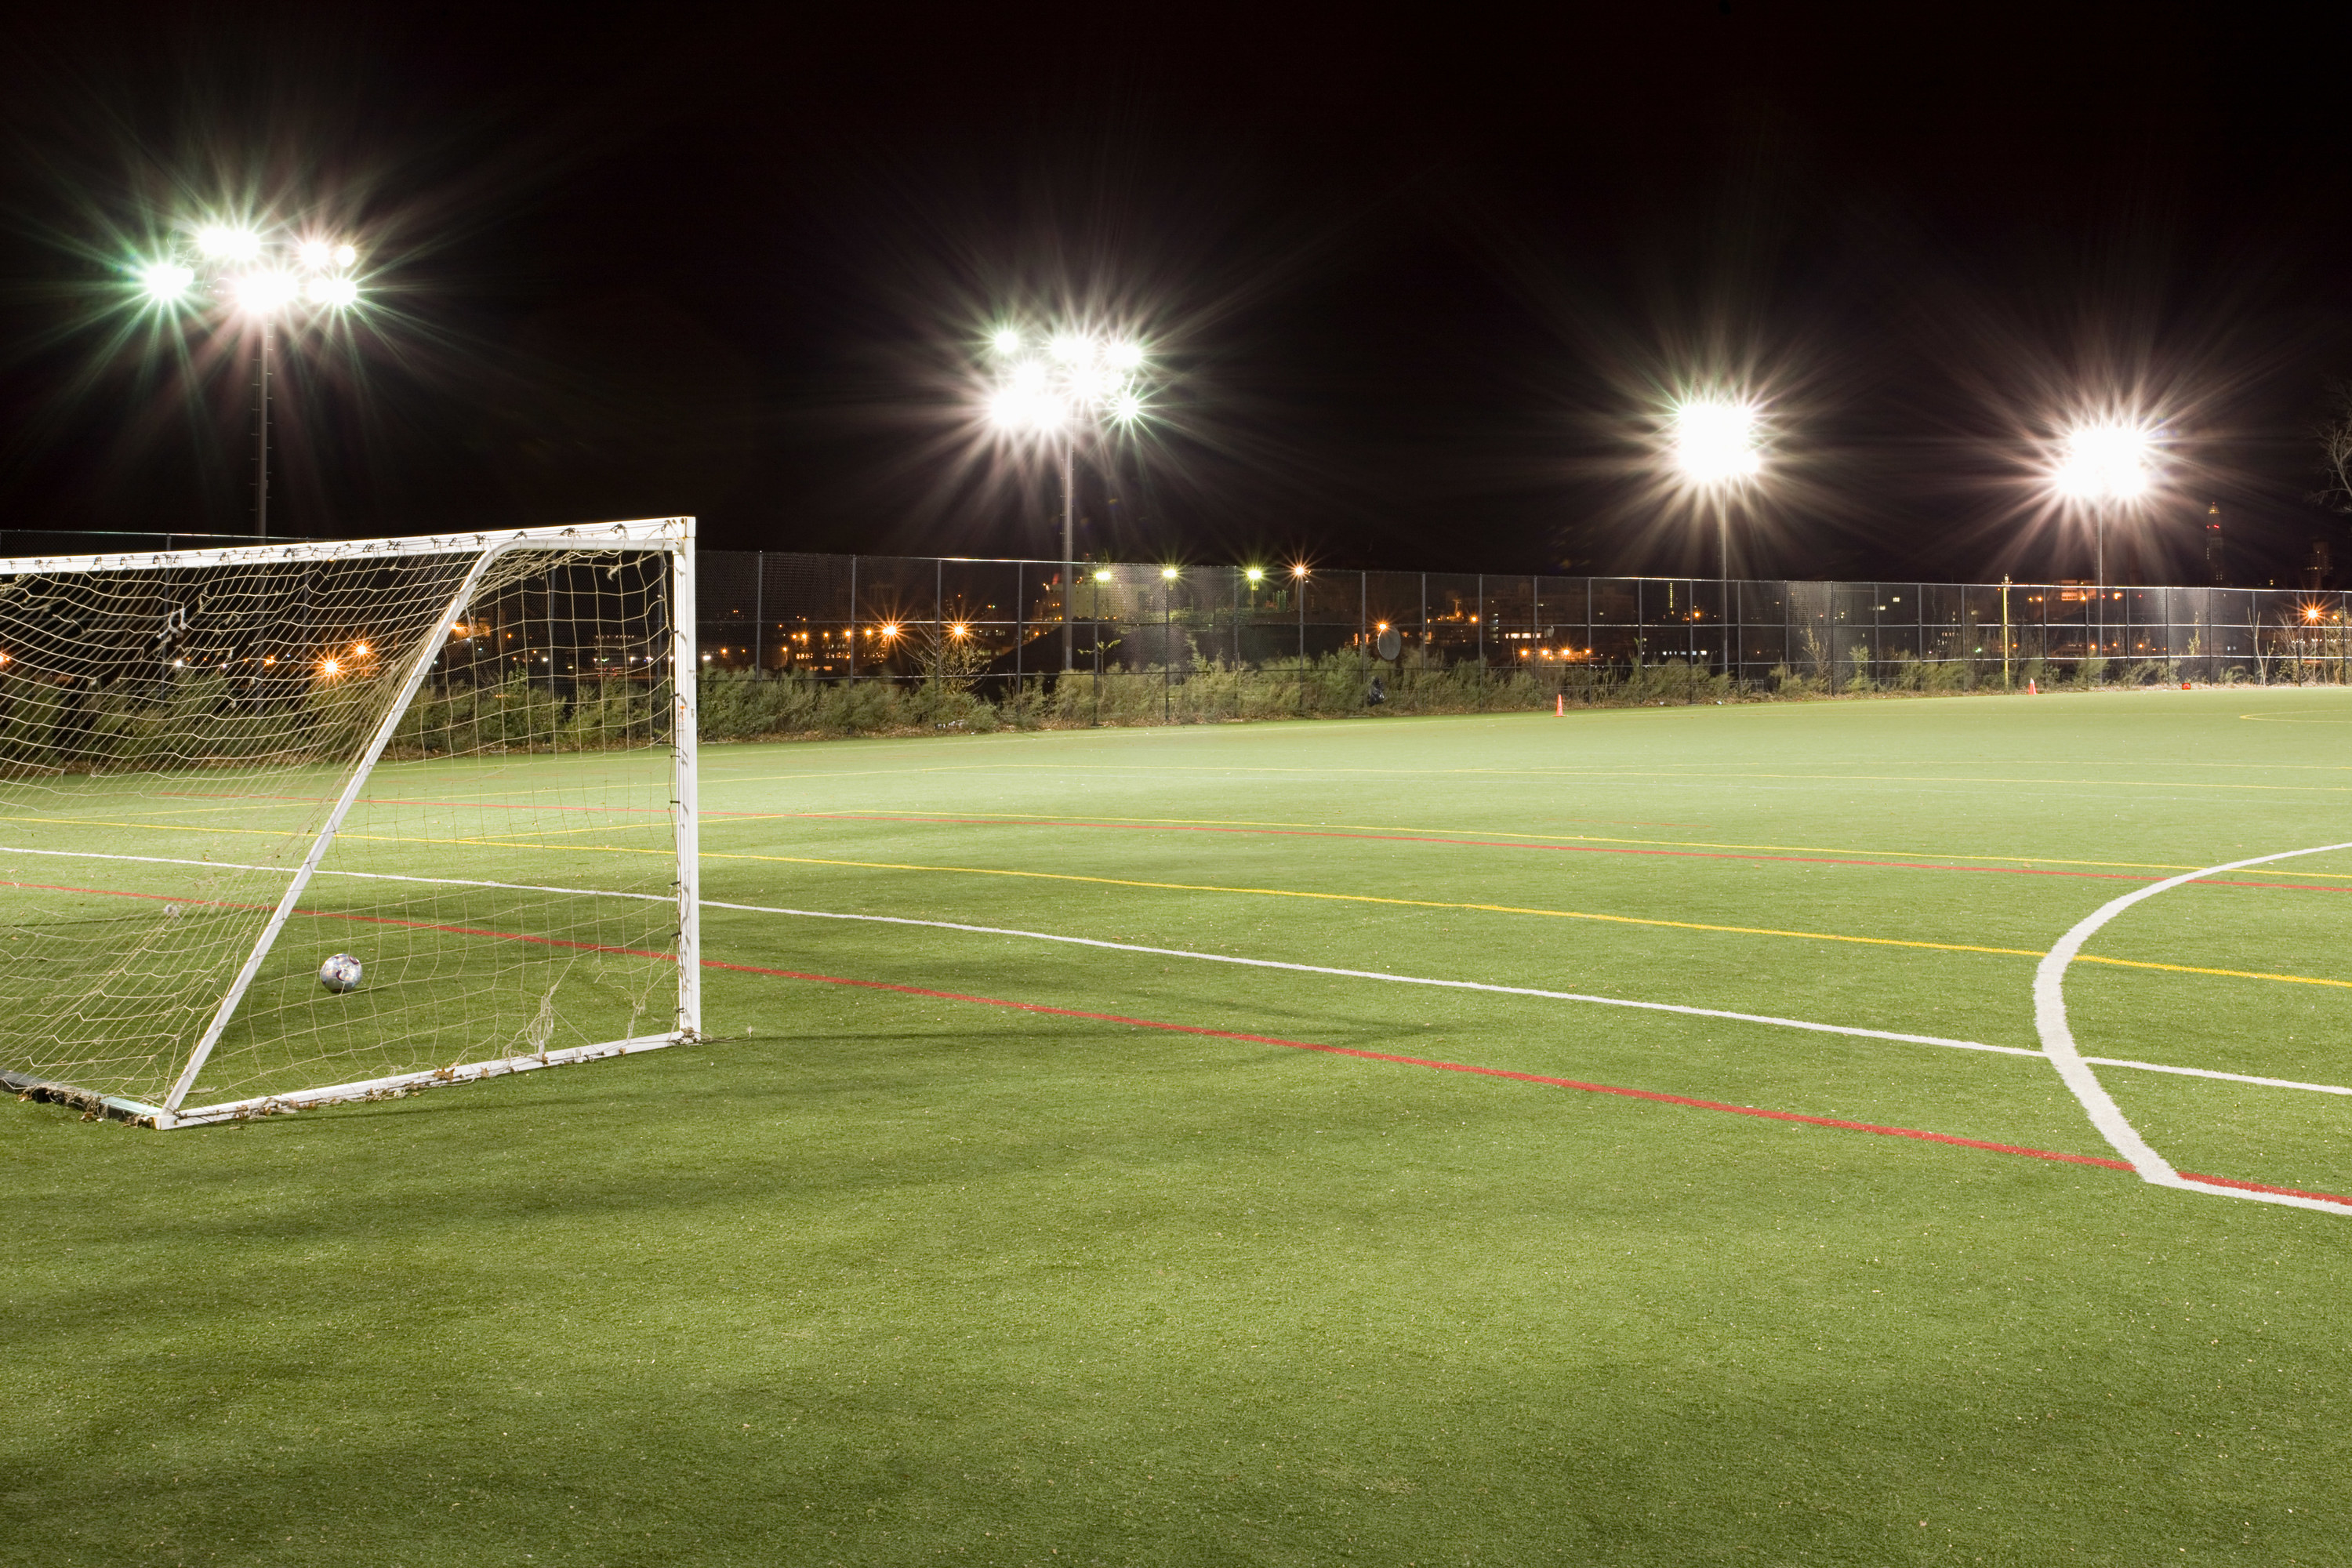 A soccer field lit up at night.